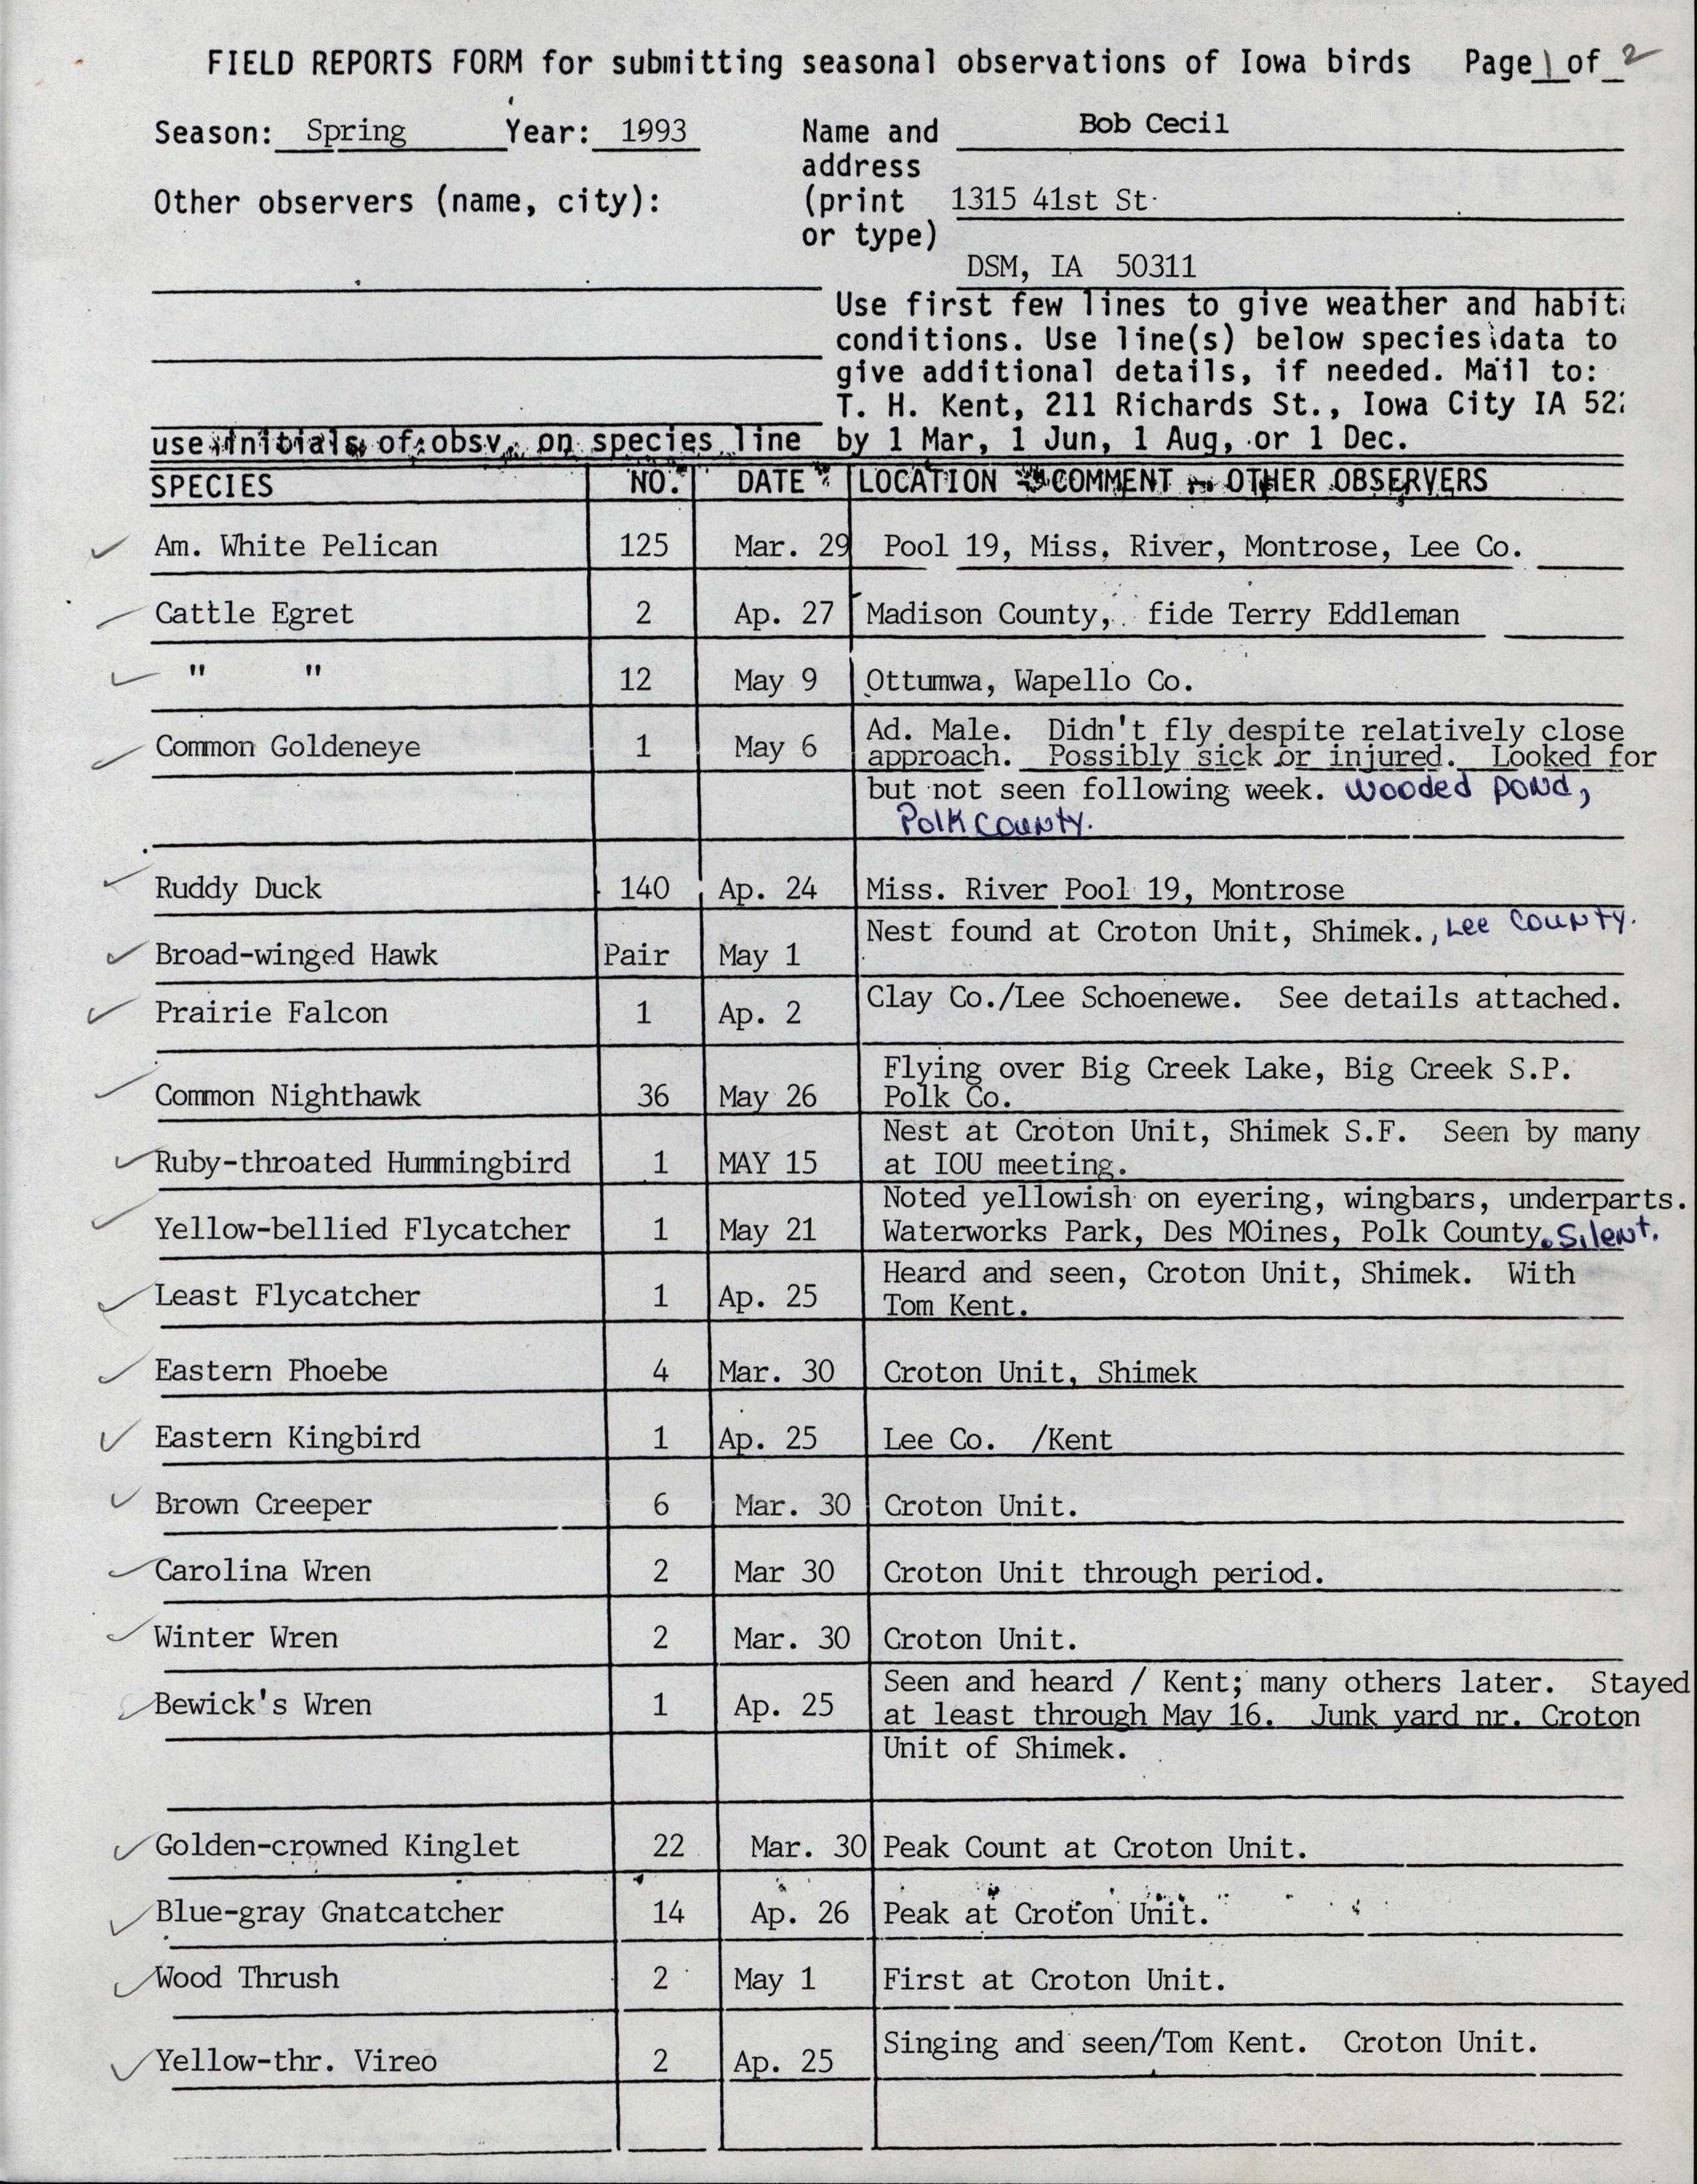 Field reports form for submitting seasonal observations of Iowa birds, Bob Cecil, Spring 1993